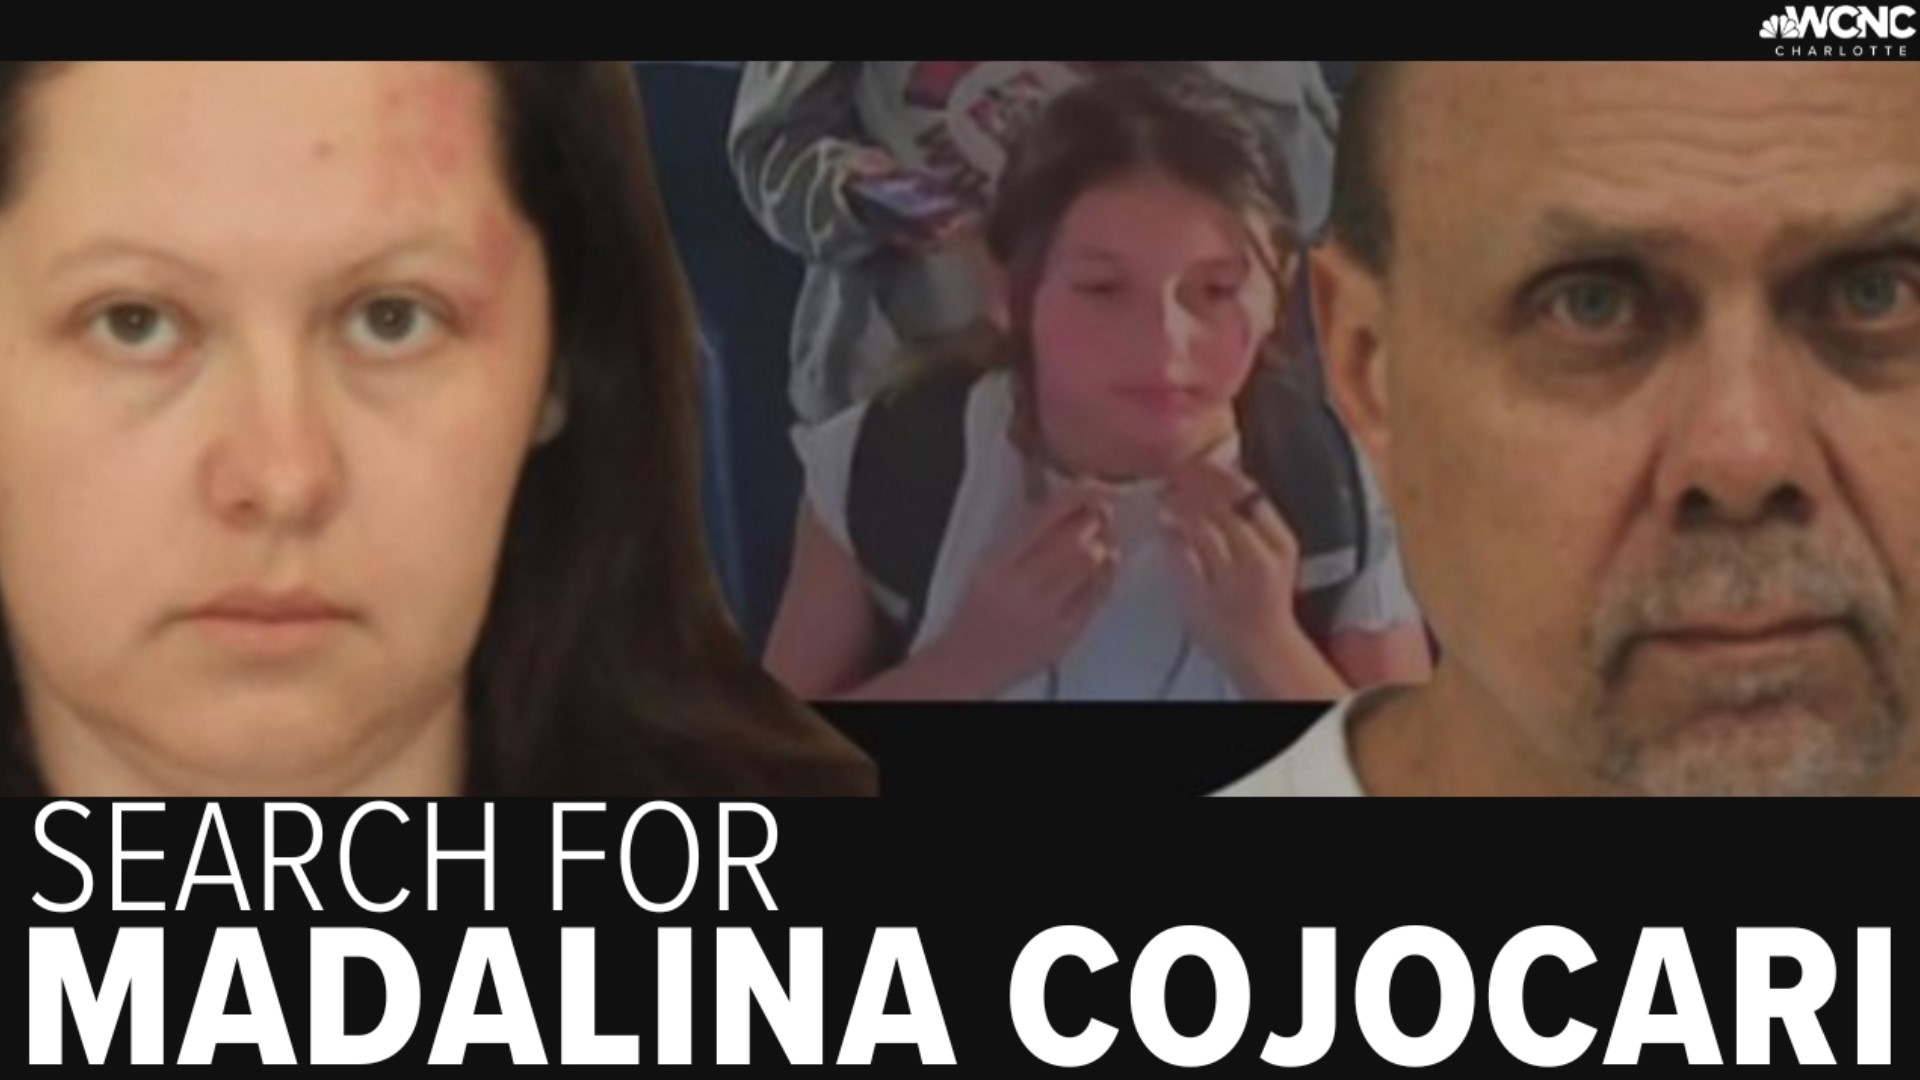 Documents show that Diana Cojocari wanted help getting the missing Cornelius, North Carolina girl away from her husband, Christopher Palmiter.